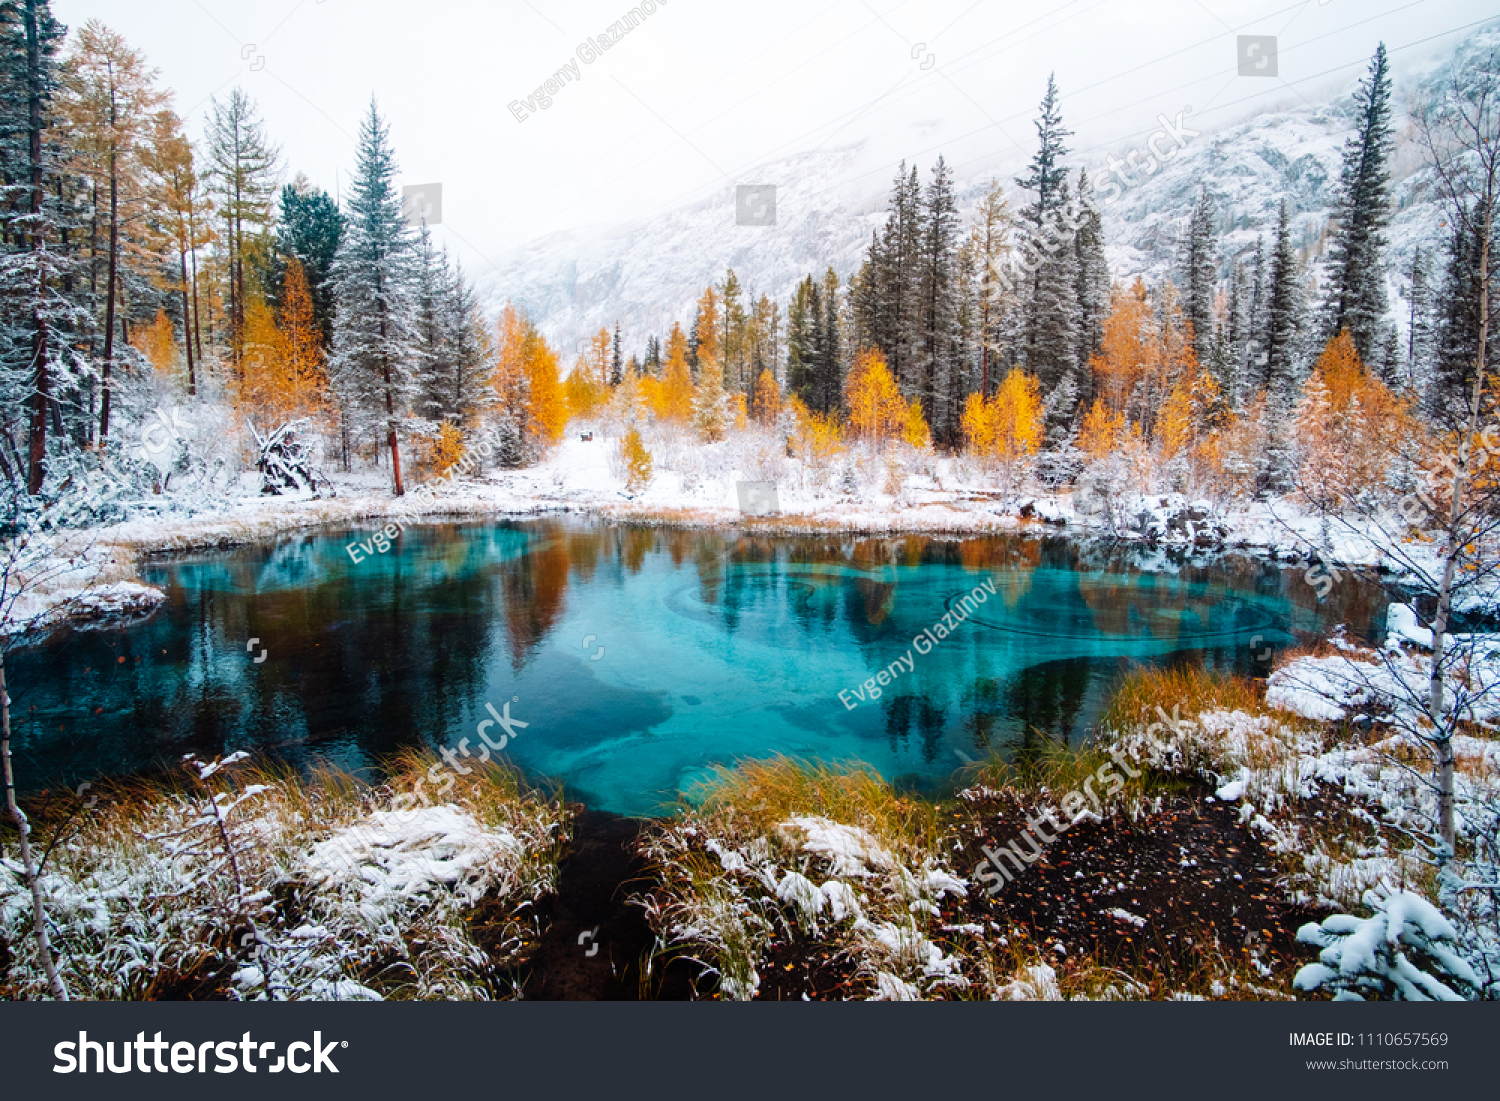 Fantastic blue geyser lake in the autumn forest. Altai, Russia #1110657569